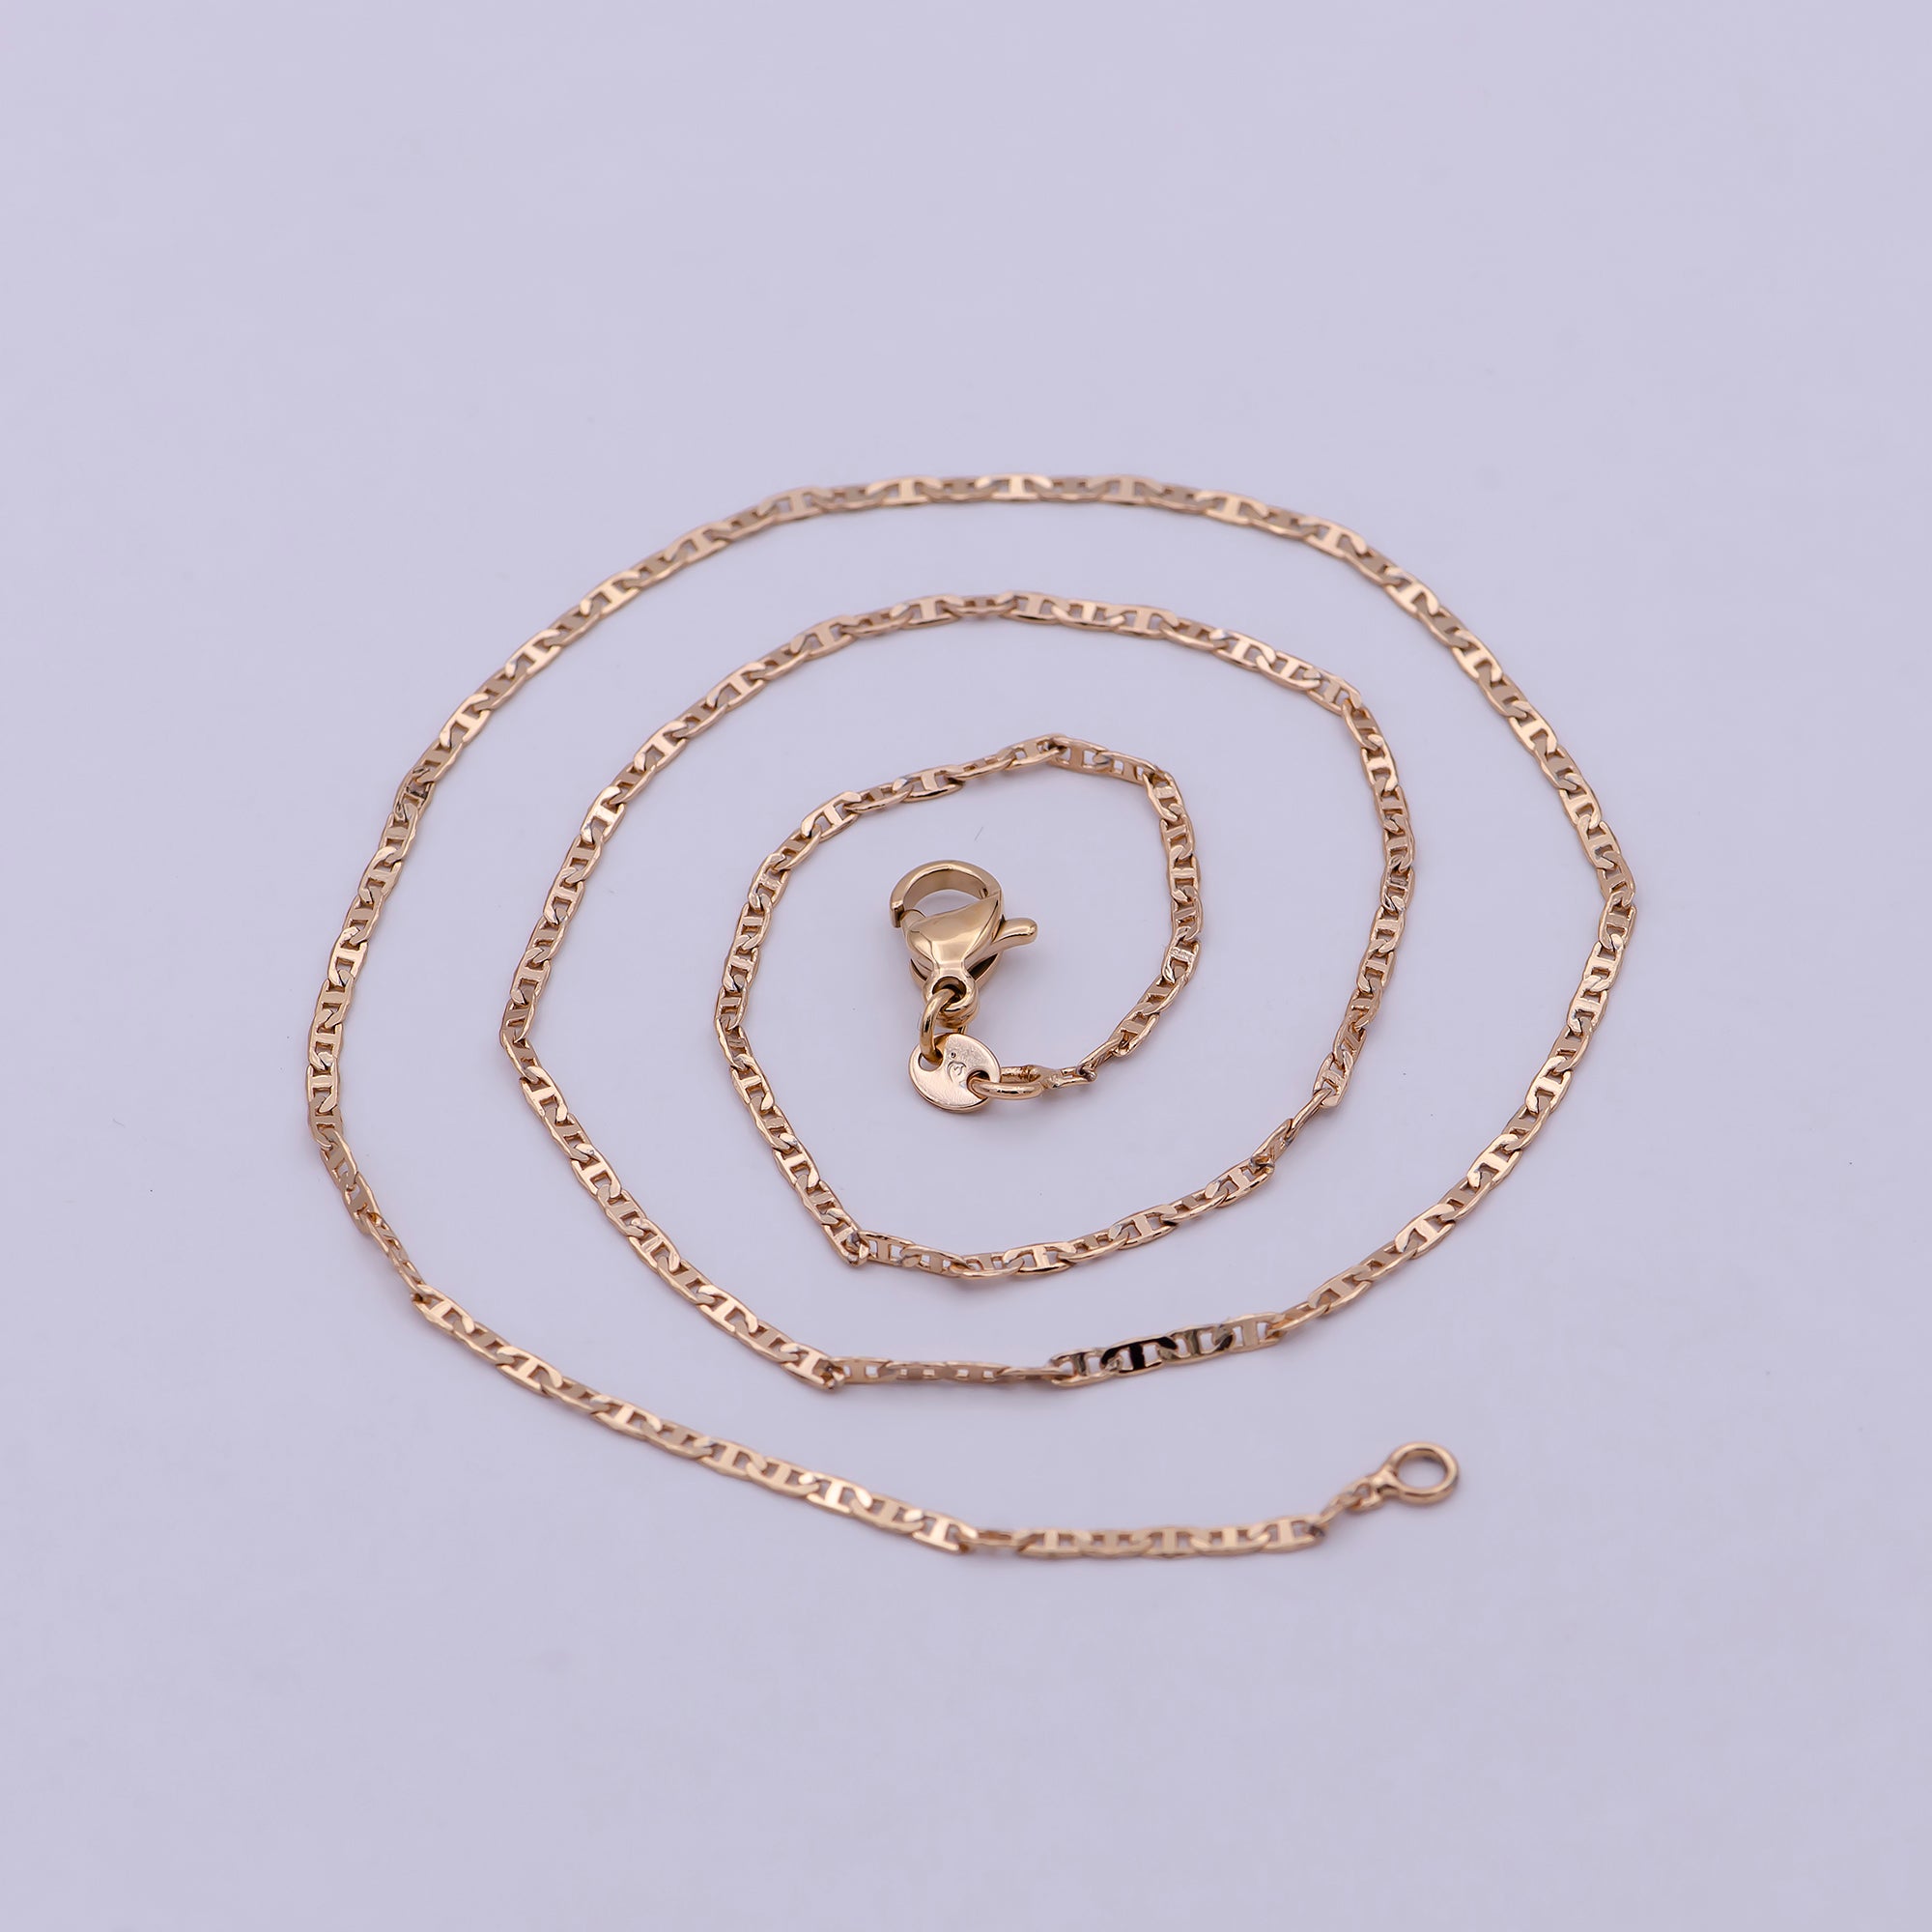 1.5mm Mariner Anchor Link Chain Necklace Rose Gold Filled Necklace 17.5 inch long WA-544 - DLUXCA